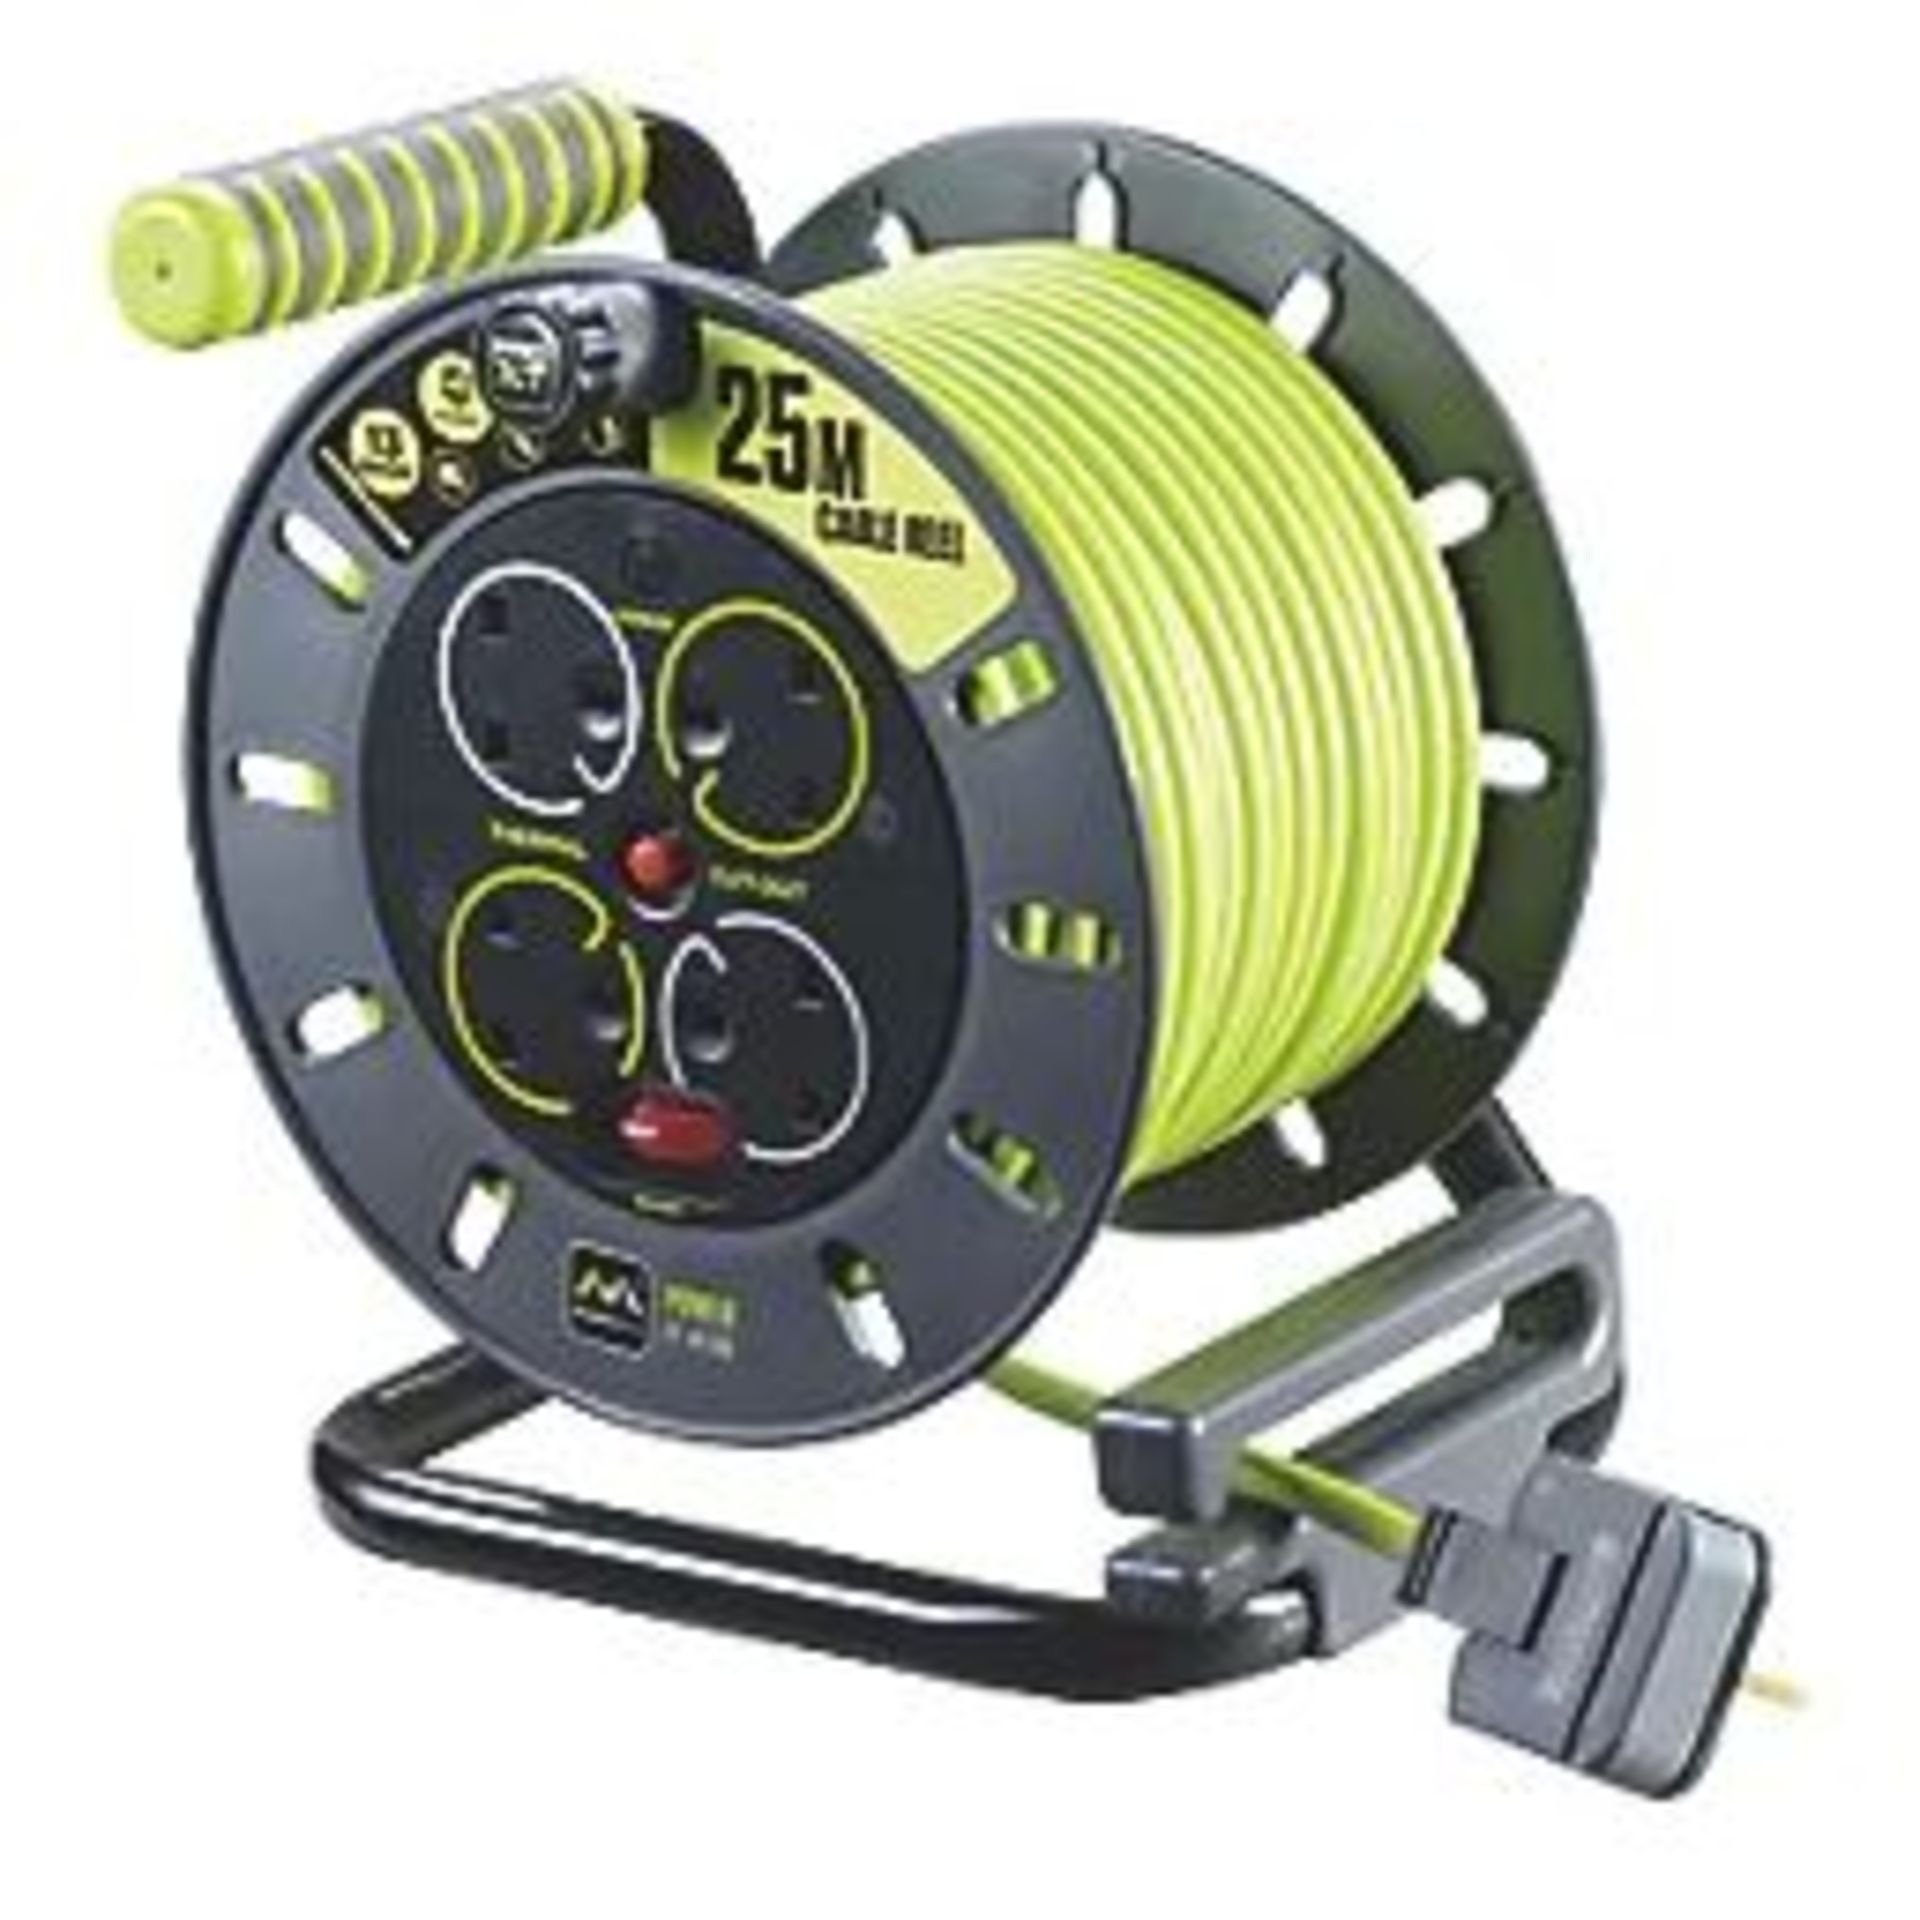 PRO XT OMU2513 13A 4-GANG 25M CABLE REEL 240V. - P4. Heavy duty construction with safety thermal